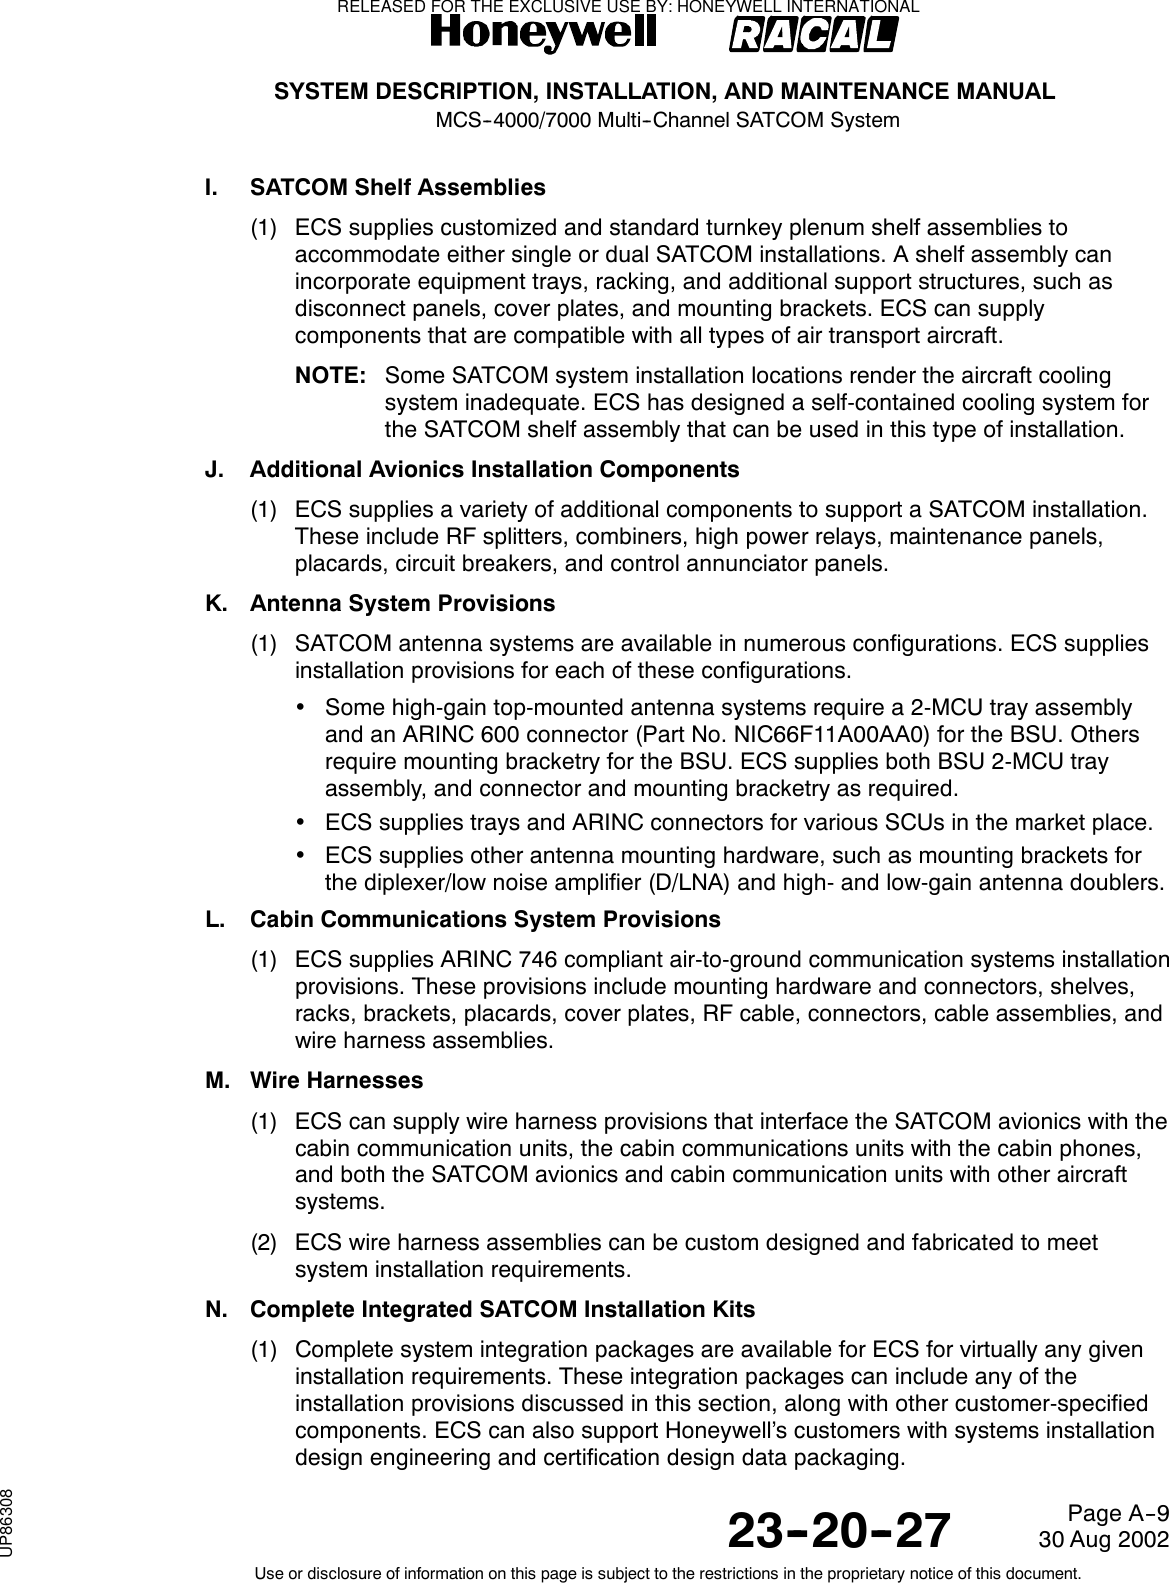 SYSTEM DESCRIPTION, INSTALLATION, AND MAINTENANCE MANUALMCS--4000/7000 Multi--Channel SATCOM System23--20--2730 Aug 2002Use or disclosure of information on this page is subject to the restrictions in the proprietary notice of this document.Page A--9I. SATCOM Shelf Assemblies(1) ECS supplies customized and standard turnkey plenum shelf assemblies toaccommodate either single or dual SATCOM installations. A shelf assembly canincorporate equipment trays, racking, and additional support structures, such asdisconnect panels, cover plates, and mounting brackets. ECS can supplycomponents that are compatible with all types of air transport aircraft.NOTE: Some SATCOM system installation locations render the aircraft coolingsystem inadequate. ECS has designed a self-contained cooling system fortheSATCOMshelfassemblythatcanbeusedinthistypeofinstallation.J. Additional Avionics Installation Components(1) ECS supplies a variety of additional components to support a SATCOM installation.These include RF splitters, combiners, high power relays, maintenance panels,placards, circuit breakers, and control annunciator panels.K. Antenna System Provisions(1) SATCOM antenna systems are available in numerous configurations. ECS suppliesinstallation provisions for each of these configurations.•Some high-gain top-mounted antenna systems require a 2-MCU tray assemblyand an ARINC 600 connector (Part No. NIC66F11A00AA0) for the BSU. Othersrequire mounting bracketry for the BSU. ECS supplies both BSU 2-MCU trayassembly, and connector and mounting bracketry as required.•ECS supplies trays and ARINC connectors for various SCUs in the market place.•ECS supplies other antenna mounting hardware, such as mounting brackets forthe diplexer/low noise amplifier (D/LNA) and high- and low-gain antenna doublers.L. Cabin Communications System Provisions(1) ECS supplies ARINC 746 compliant air-to-ground communication systems installationprovisions. These provisions include mounting hardware and connectors, shelves,racks, brackets, placards, cover plates, RF cable, connectors, cable assemblies, andwire harness assemblies.M. Wire Harnesses(1) ECS can supply wire harness provisions that interface the SATCOM avionics with thecabin communication units, the cabin communications units with the cabin phones,and both the SATCOM avionics and cabin communication units with other aircraftsystems.(2) ECS wire harness assemblies can be custom designed and fabricated to meetsystem installation requirements.N. Complete Integrated SATCOM Installation Kits(1) Complete system integration packages are available for ECS for virtually any giveninstallation requirements. These integration packages can include any of theinstallation provisions discussed in this section, along with other customer-specifiedcomponents. ECS can also support Honeywell’s customers with systems installationdesign engineering and certification design data packaging.RELEASED FOR THE EXCLUSIVE USE BY: HONEYWELL INTERNATIONALUP86308